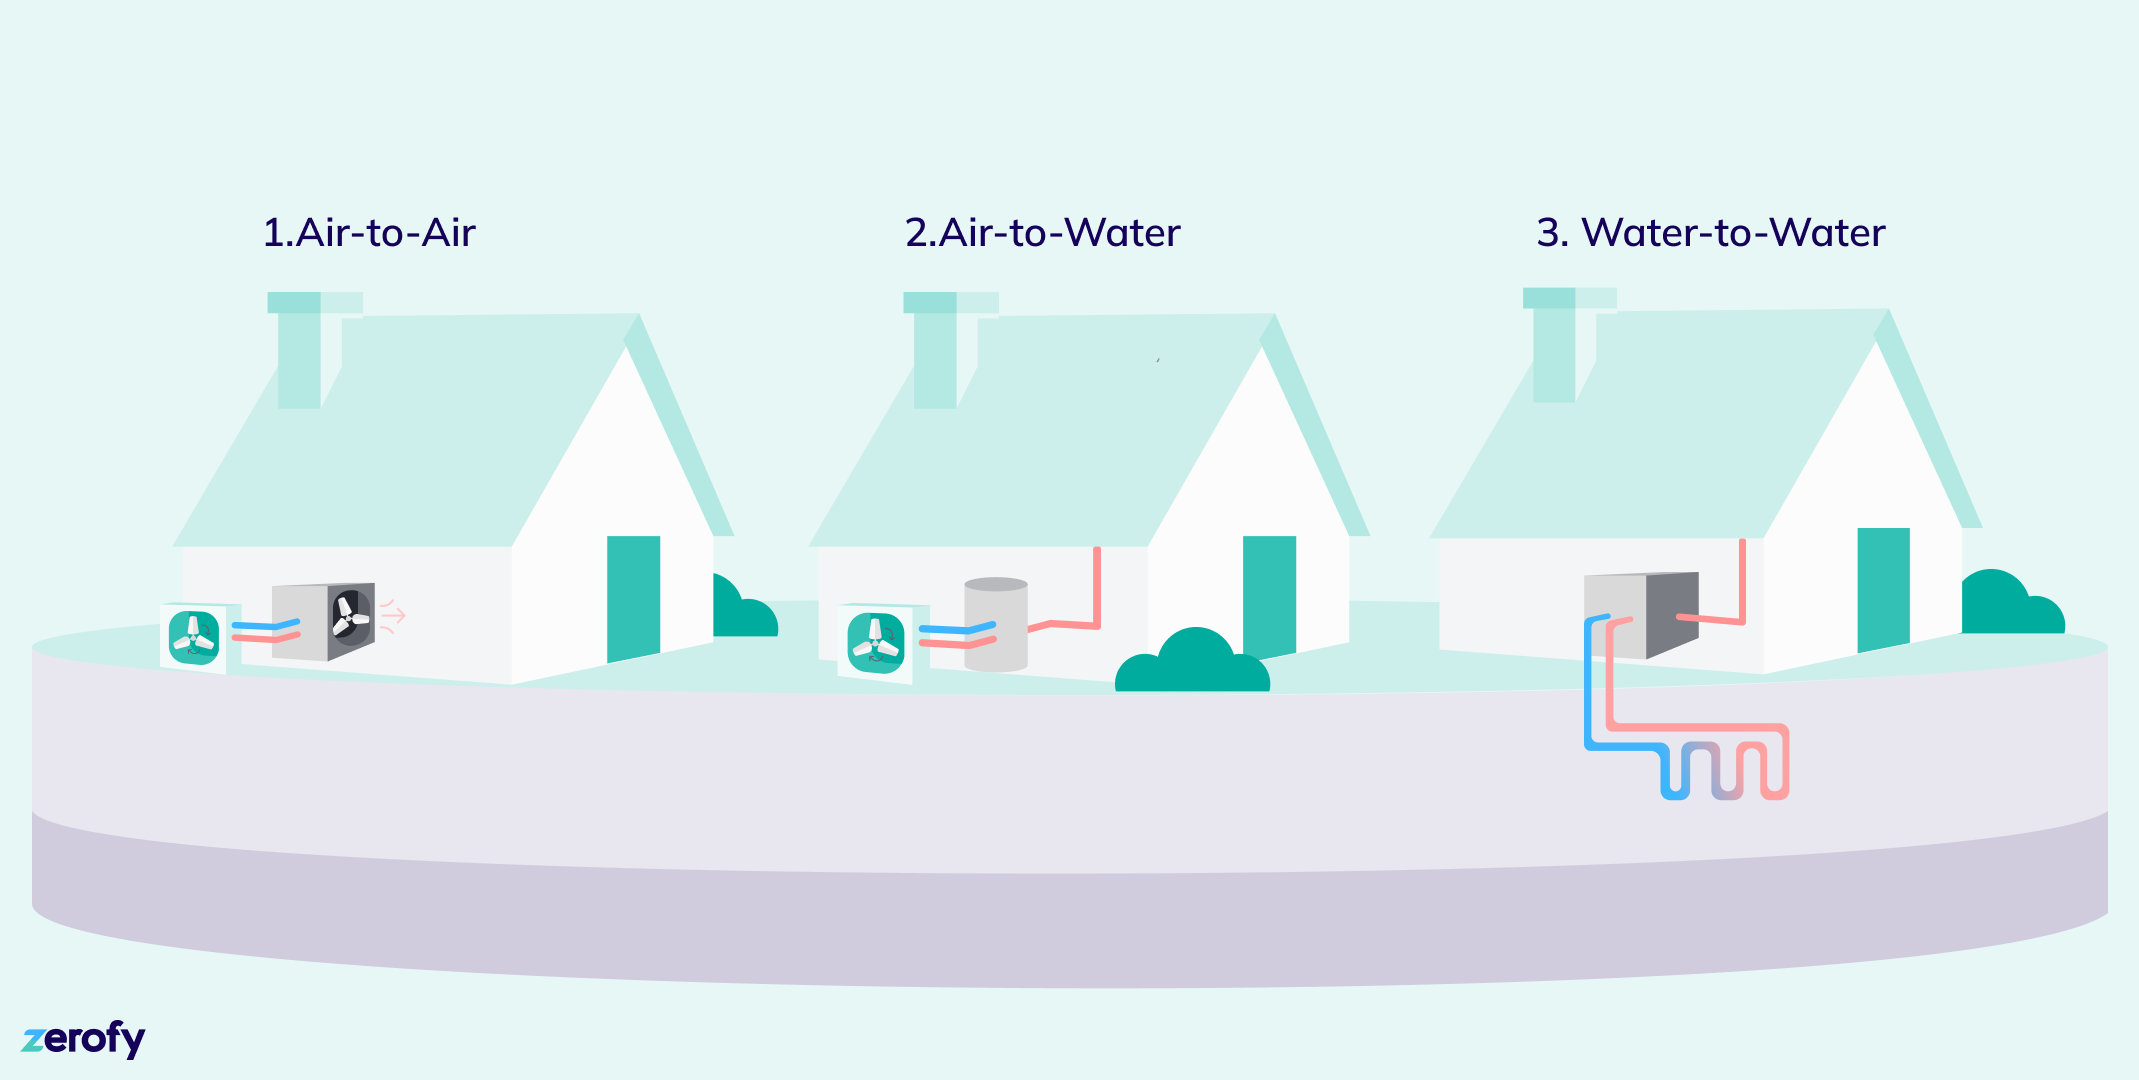 Different types of heat pumps: air-to-air, air-to-water and water-to-water